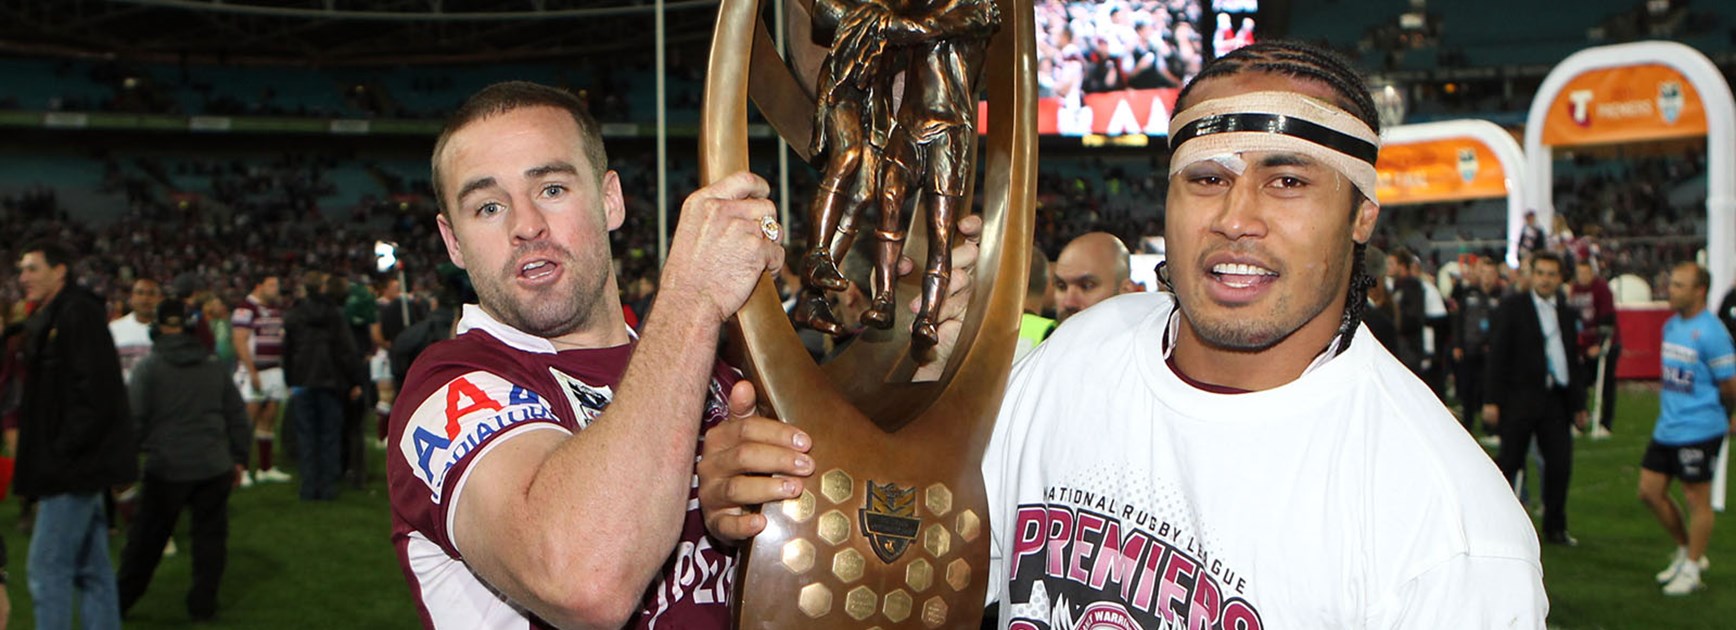 Steve Matai celebrates Manly 2011 Grand Final win over the Warriors.